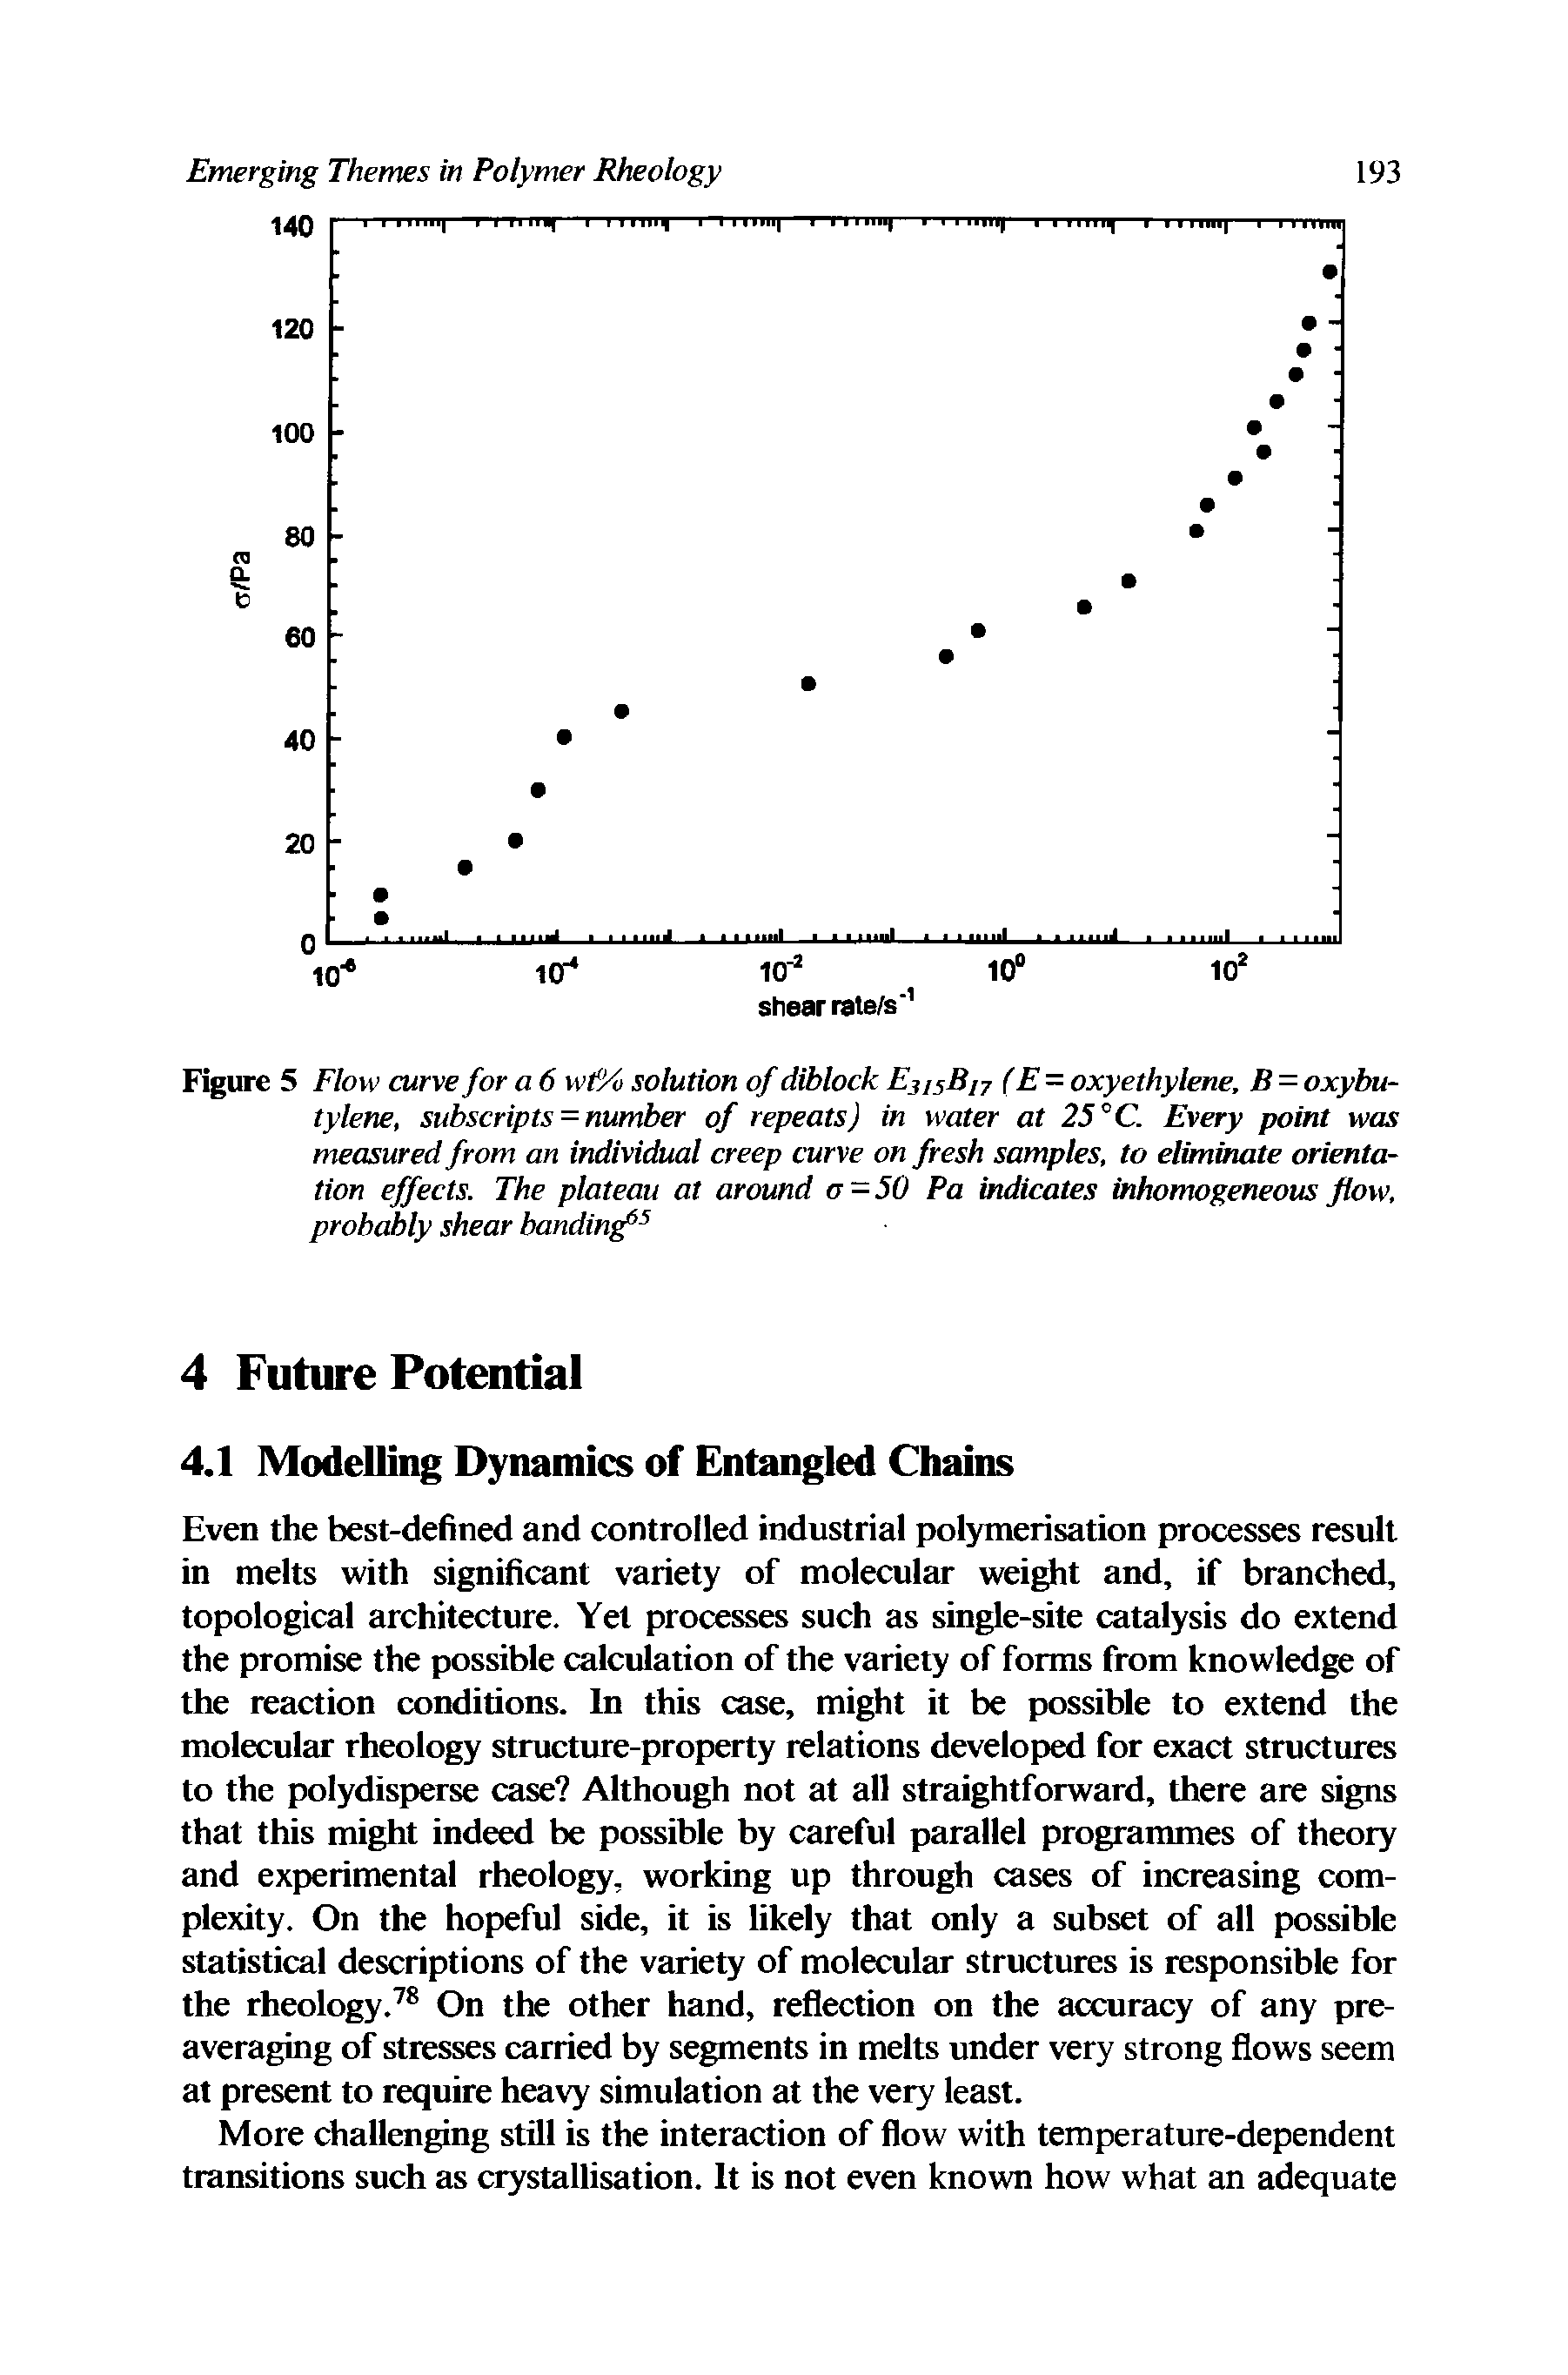 Figure 5 Flow curve for a 6 wt% solution of diblock Ej/sB/j (E = oxyethylene, B = oxybu-tylene, subscripts = number of repeats) in water at 25 C. Every point was measured from an individual creep curve on fresh samples, to eliminate orientation effects. The plateau at around a-50 Pa indicates inhomogeneous flow, probably shear bandingf ...